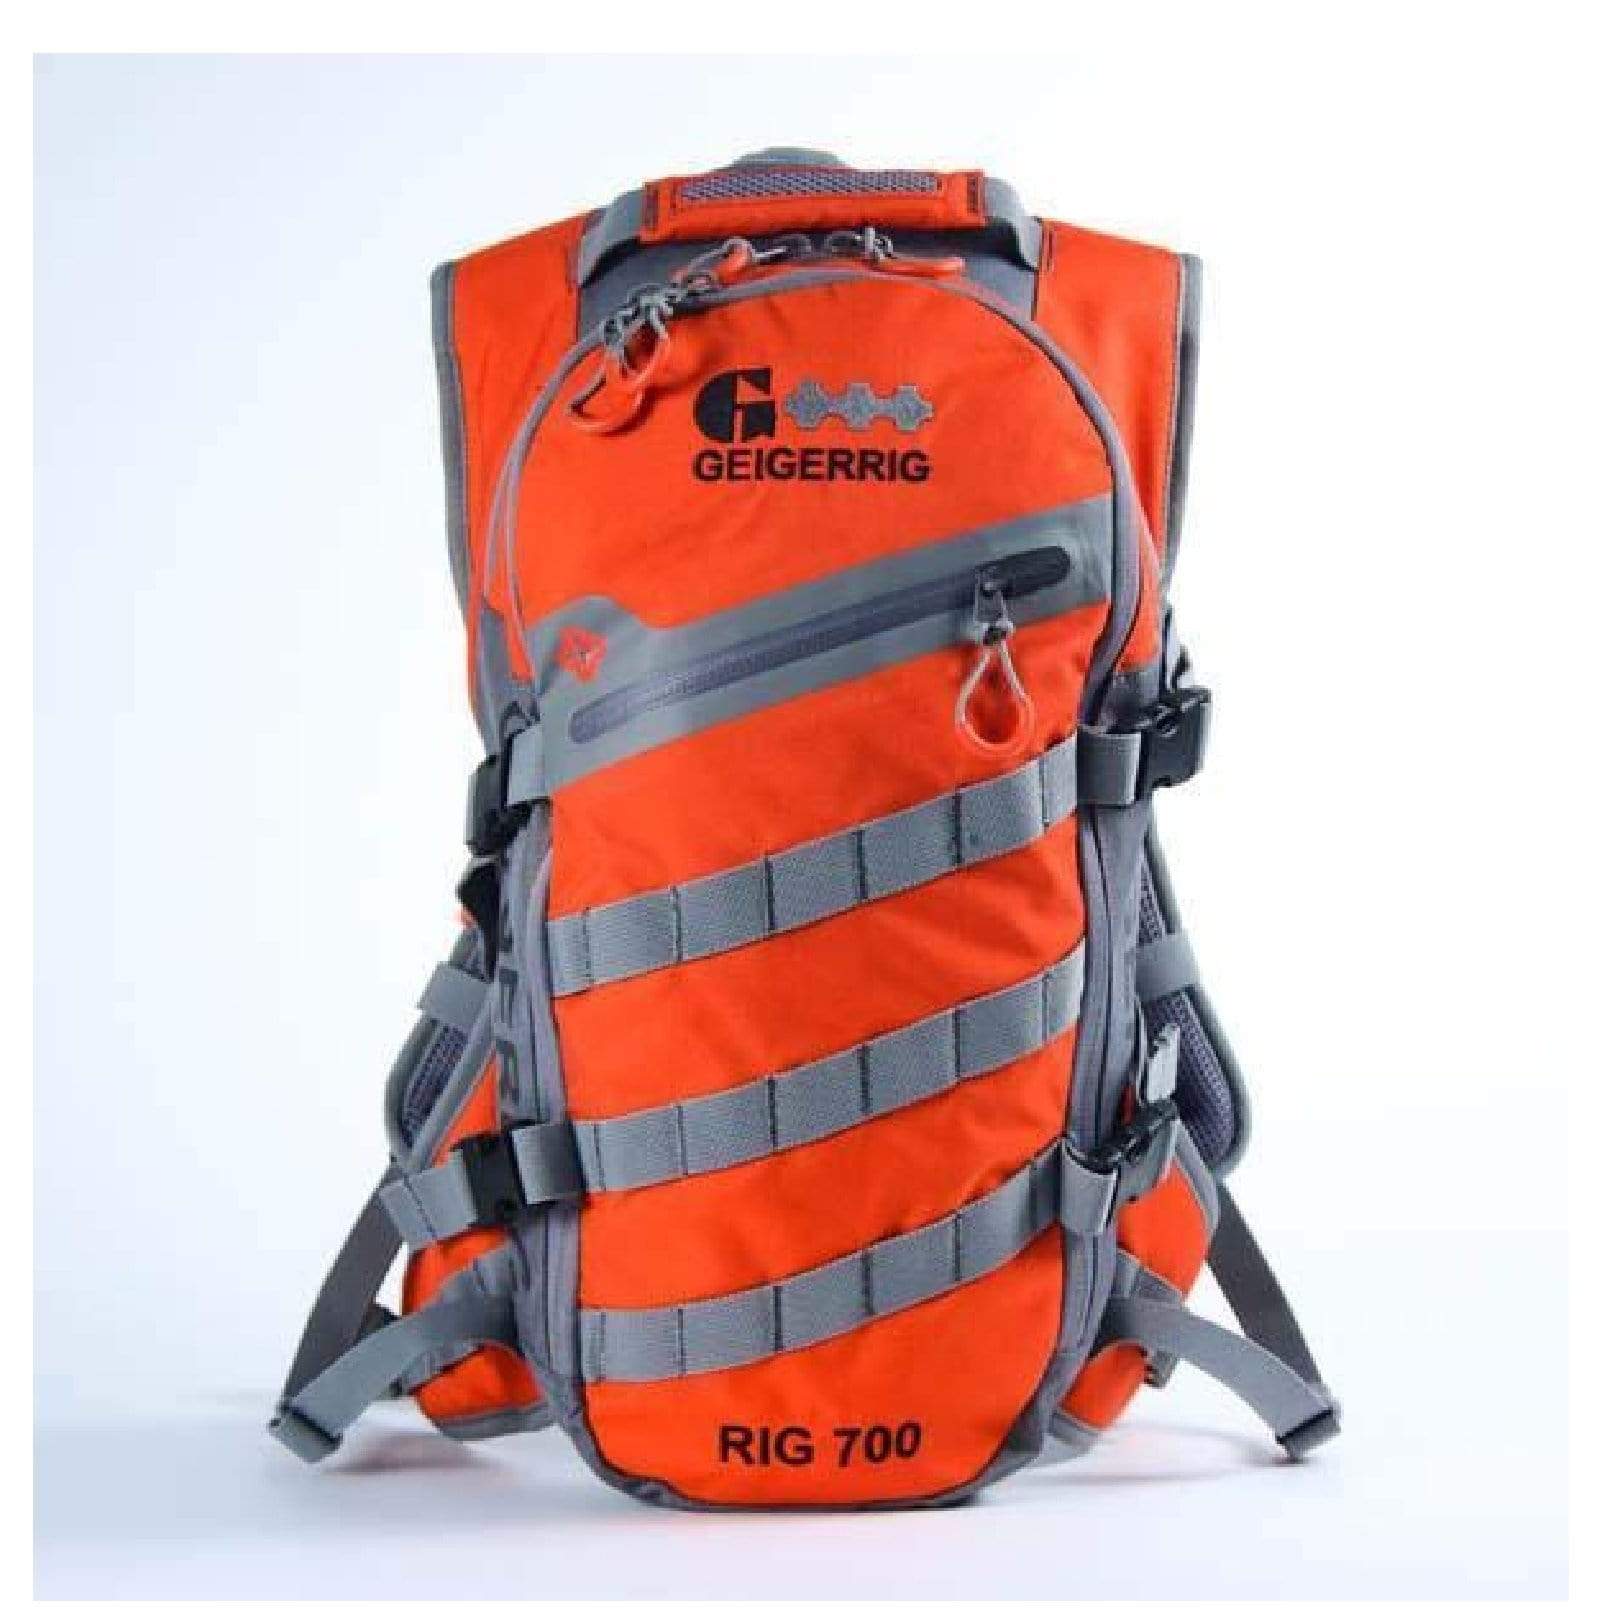 Geigerrig Camping & Outdoor : Hydration Systems Geigerrig Rig 700M Hydration System Orange-Gunmetal